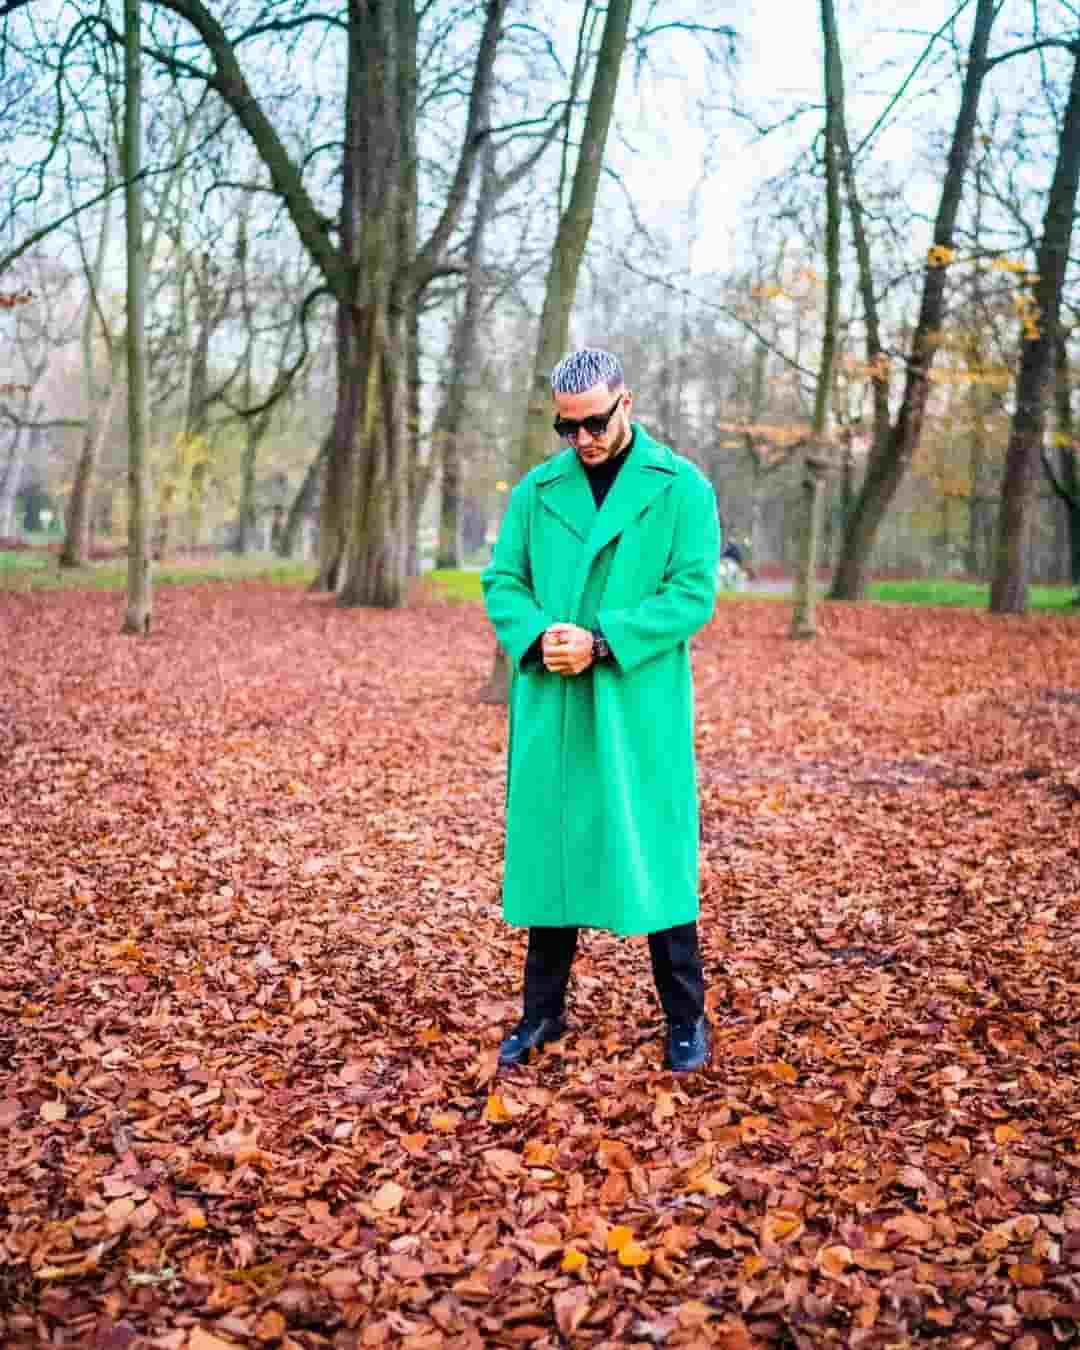 DJ Snake - Biography, Profile, Facts, and Career